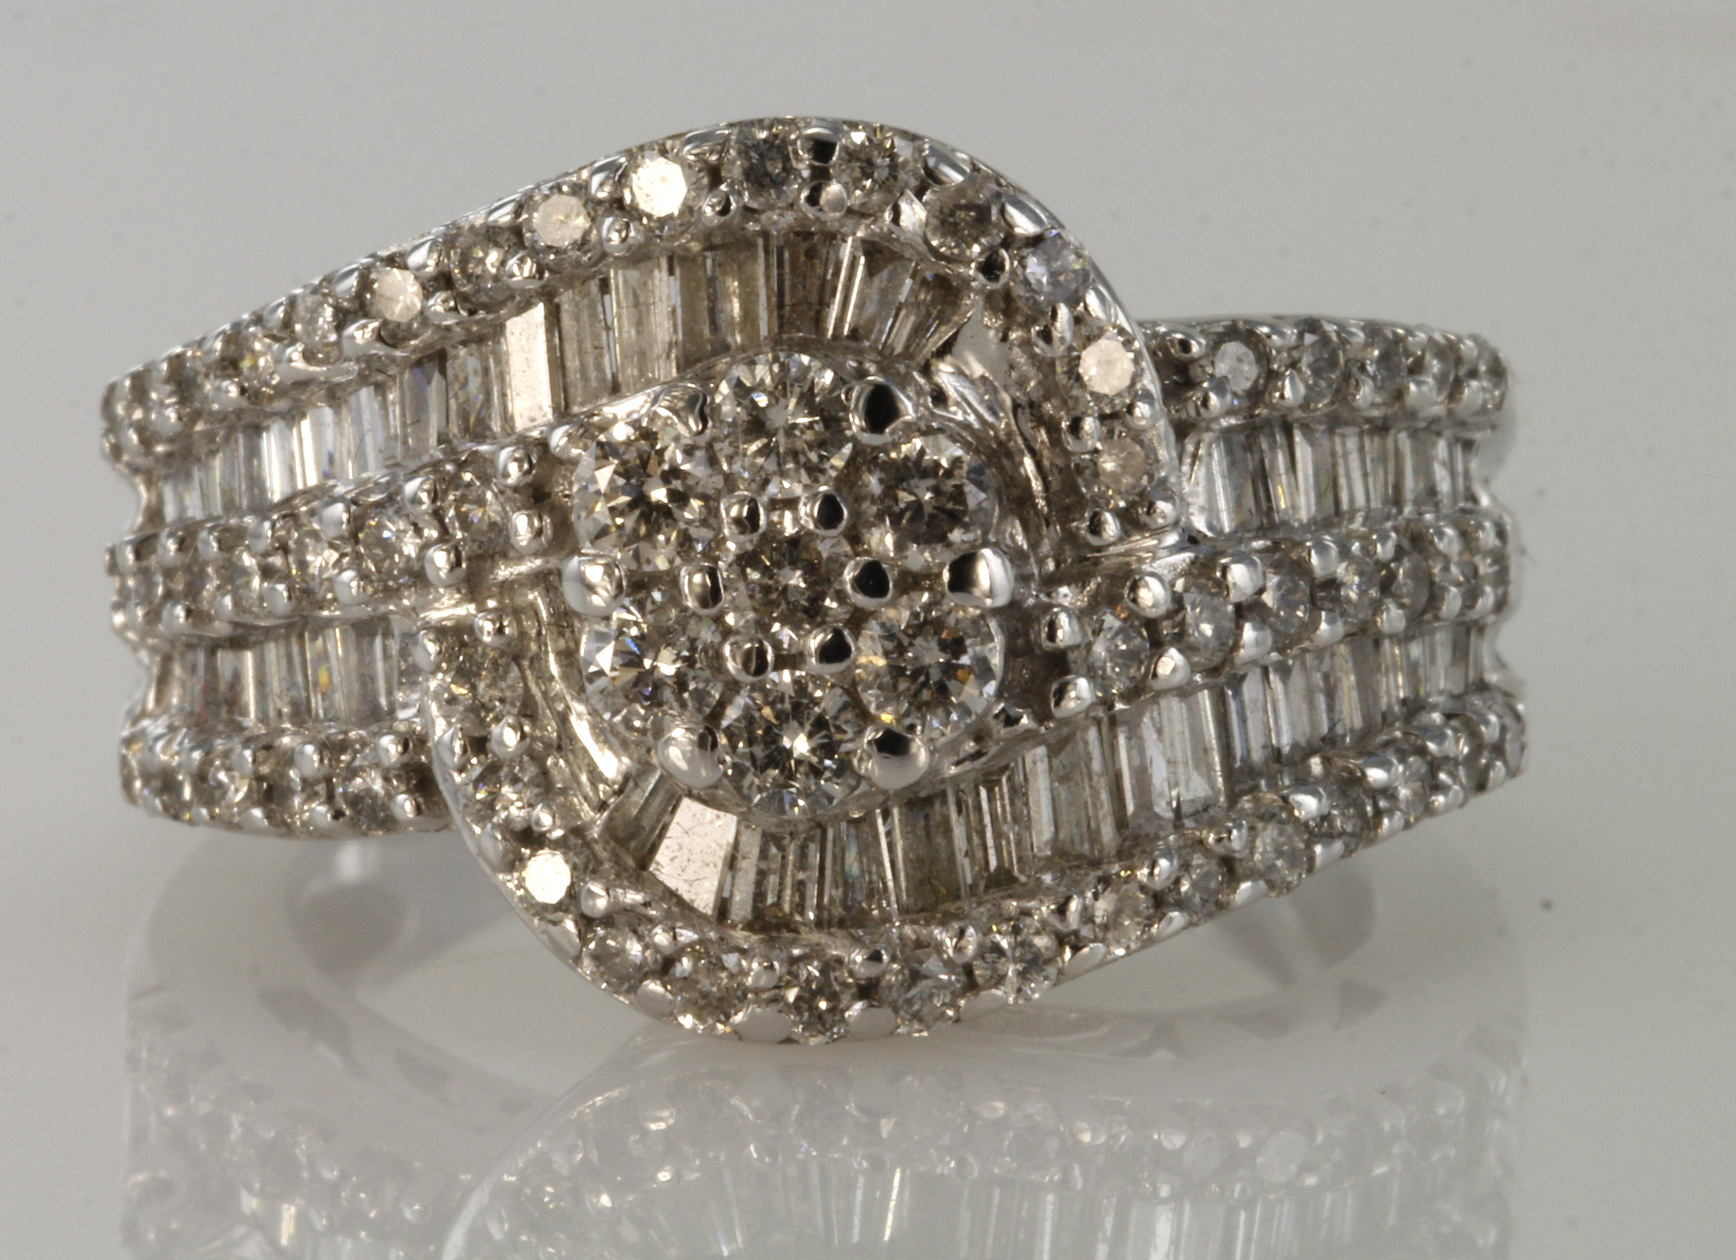 14ct white gold diamond cluster ring with central seven stone daisy cluster surrounded by a row of